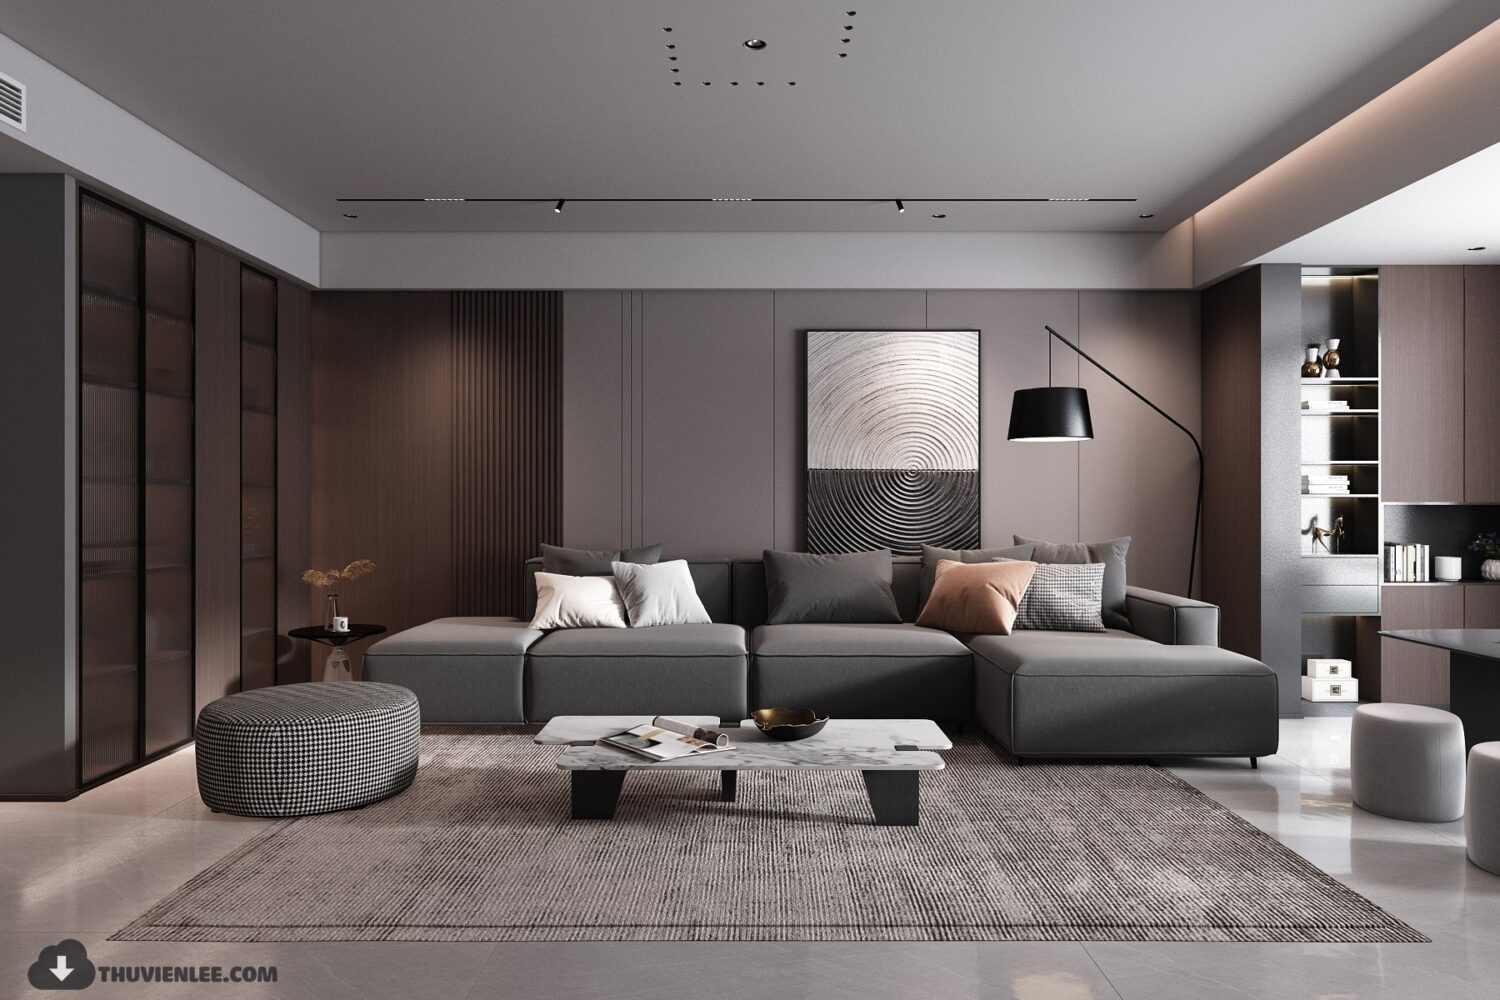 13147. Download Free 3D Living Room Interior Model By Huy Hieu Lee